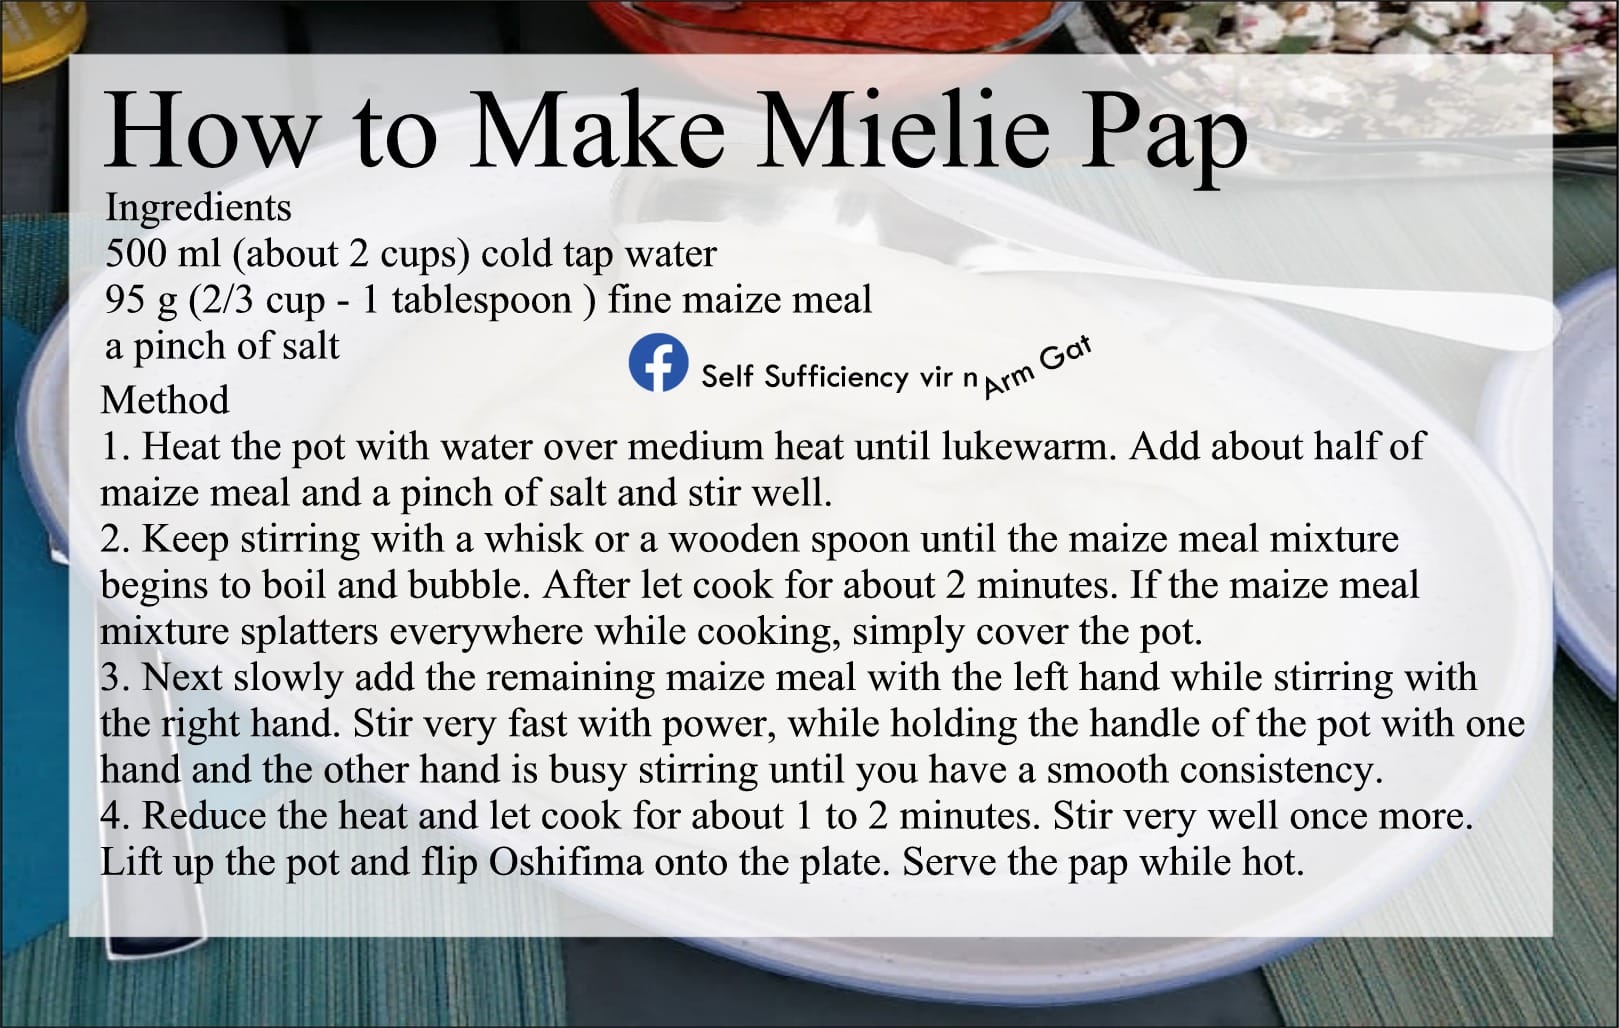 How to Make Mielie Pap